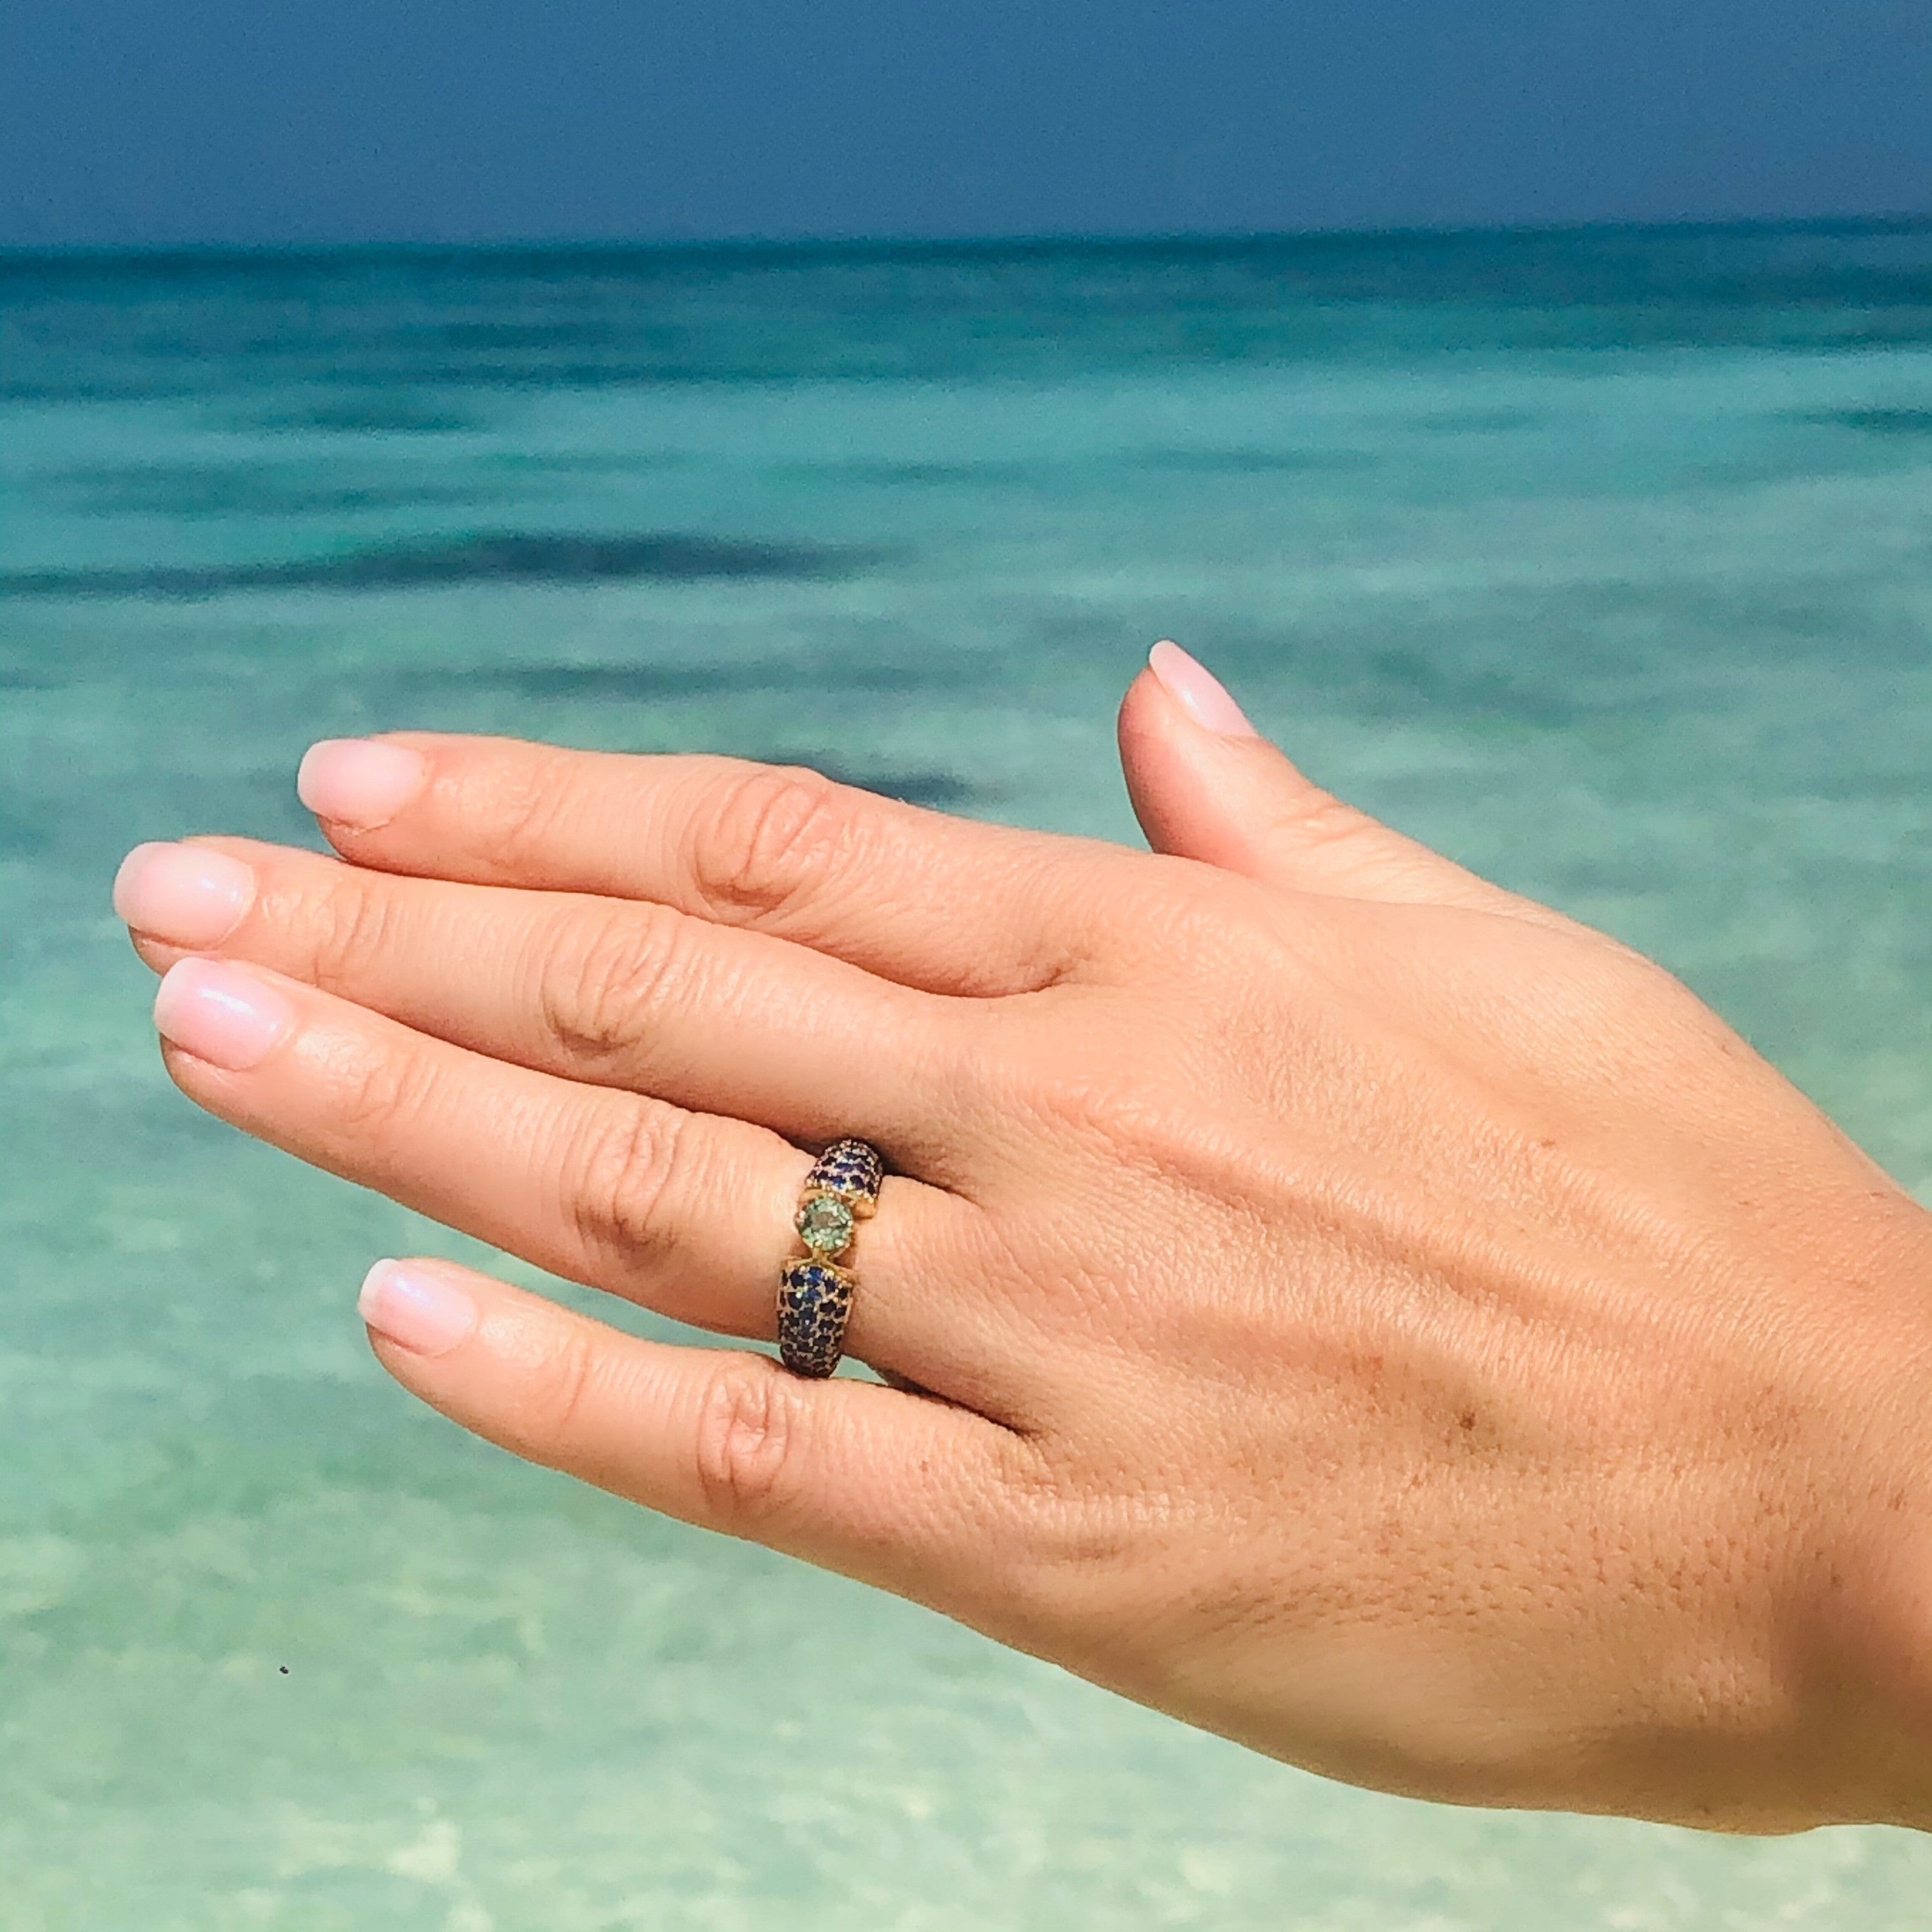 Blue and Green Sapphire Ring photographed on models ring finger. Blue ocean and sky in the background.